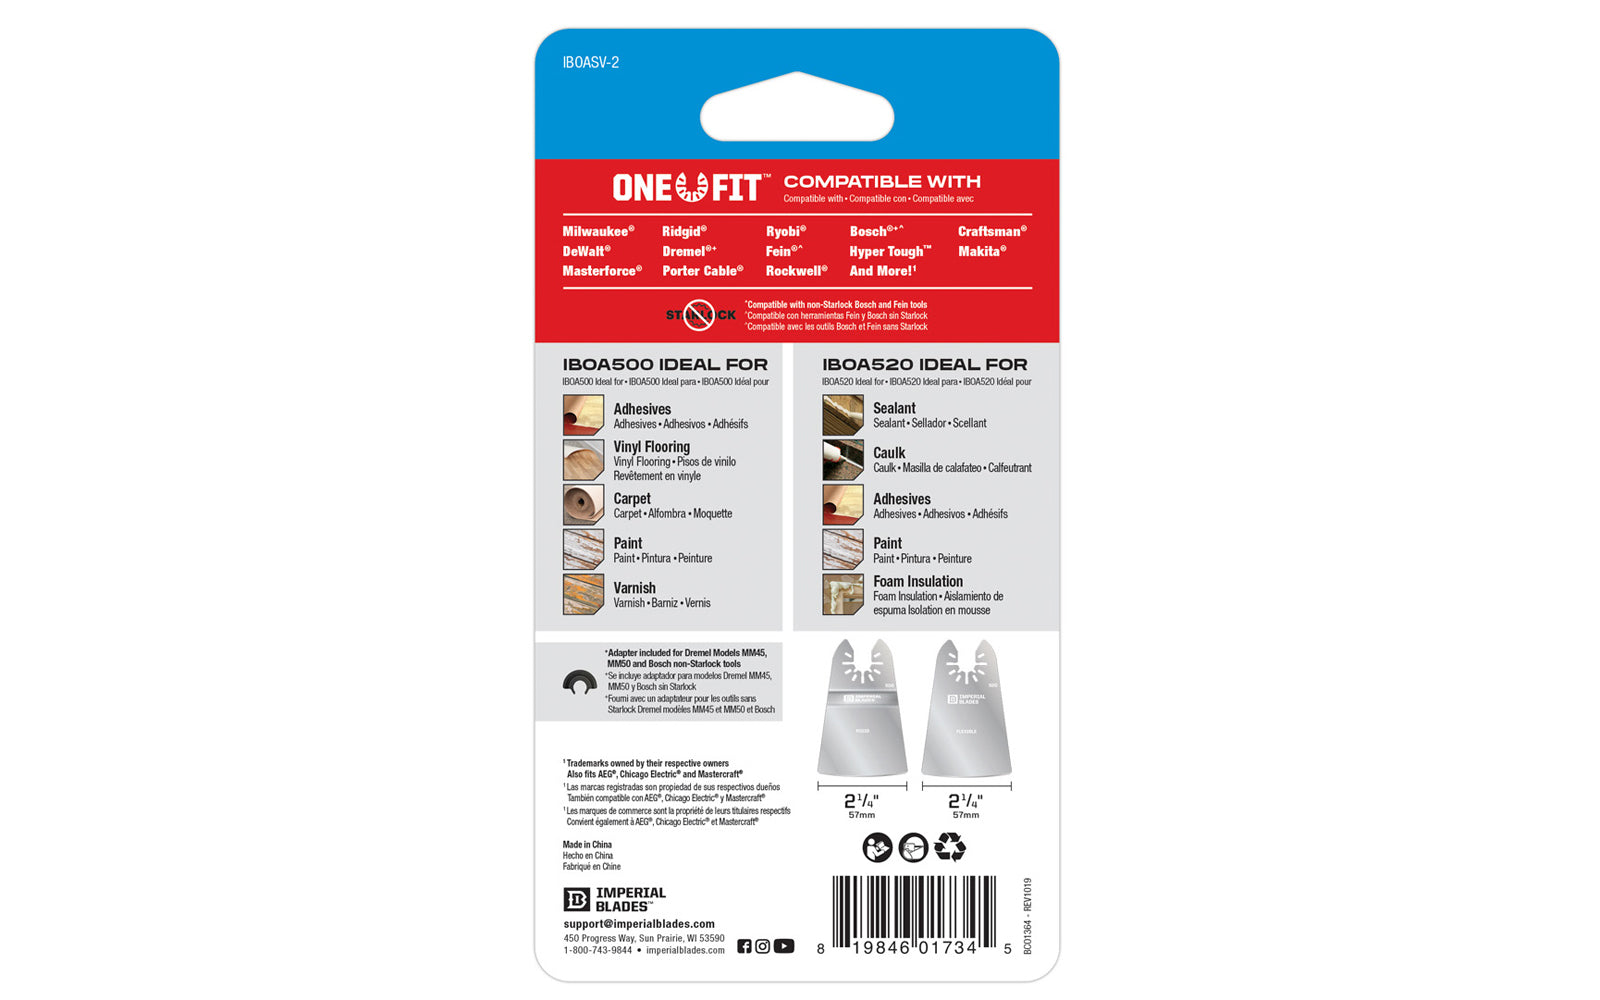 Imperial Blades "One Fit" 2-1/4" Rigid & Flexible Scraper Variety Pack - 2 Pieces in pack. Recommended applications: Adhesives, Vinyl Flooring, Carpet, Caulk, Sealant, Paint, Varnish, Foam Insulation. Model IBOASV-2. 819846017345. Blade Width: 2-1/4" (57 mm). Blade Depth:  2-1/4" (57 mm). Made in USA. 